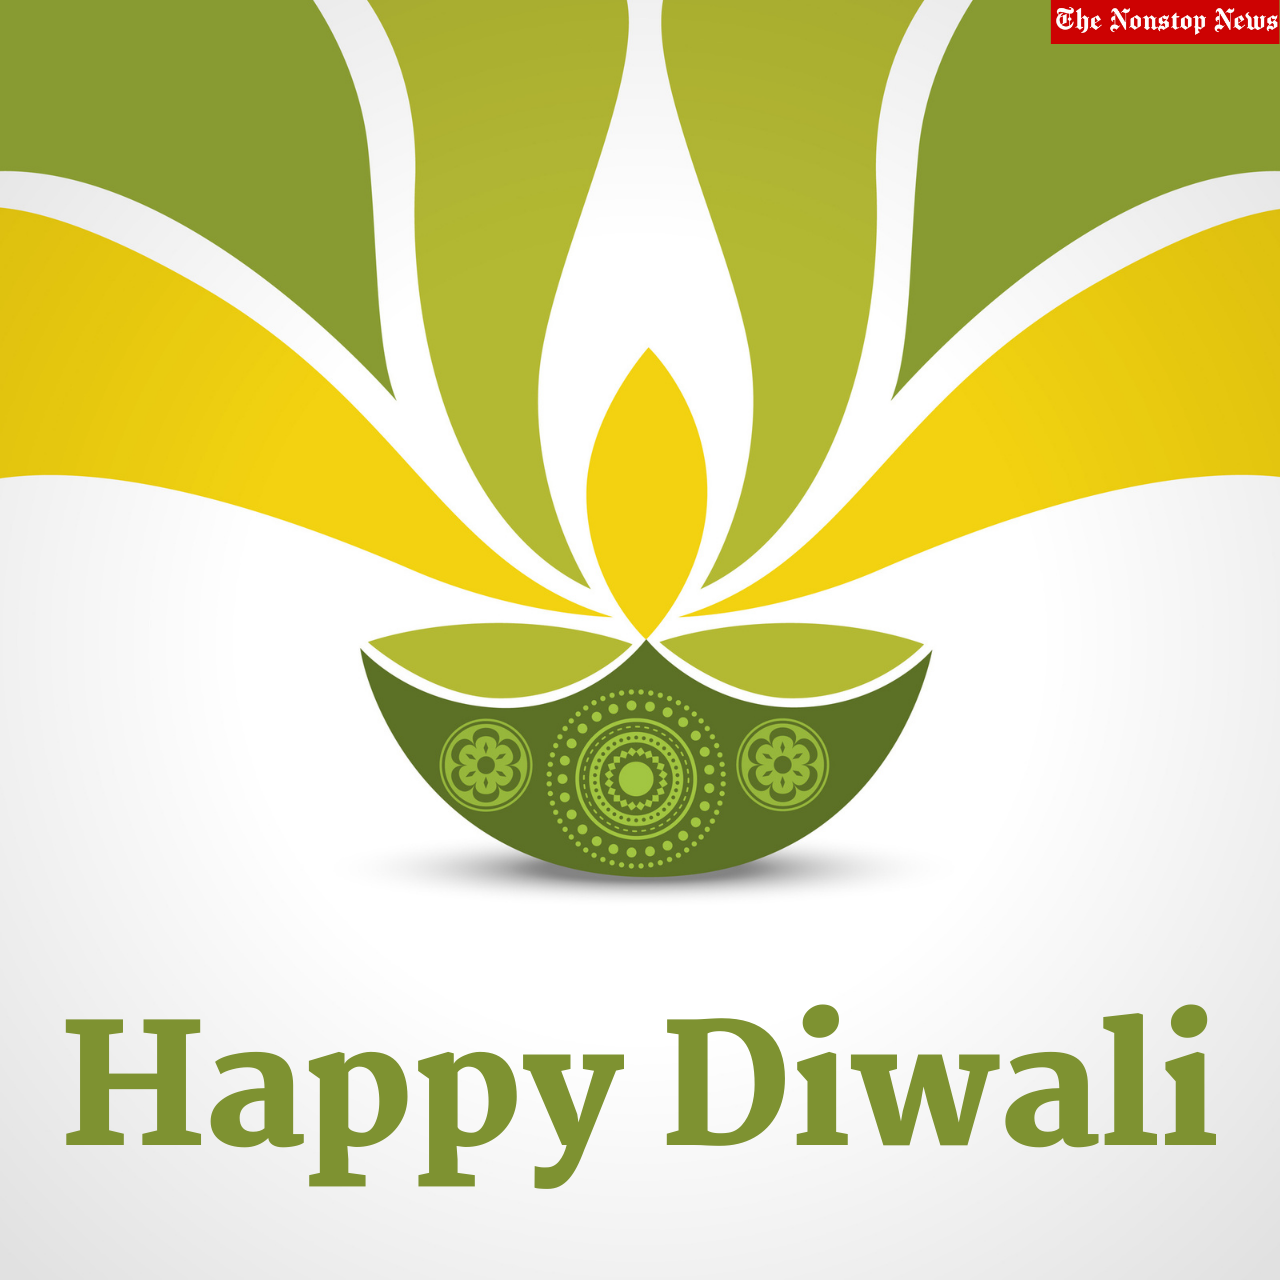 Happy Diwali 2021 Instagram Captions, WhatsApp Status, Facebook Post, and Twitter Wishes to Share on Deepavali